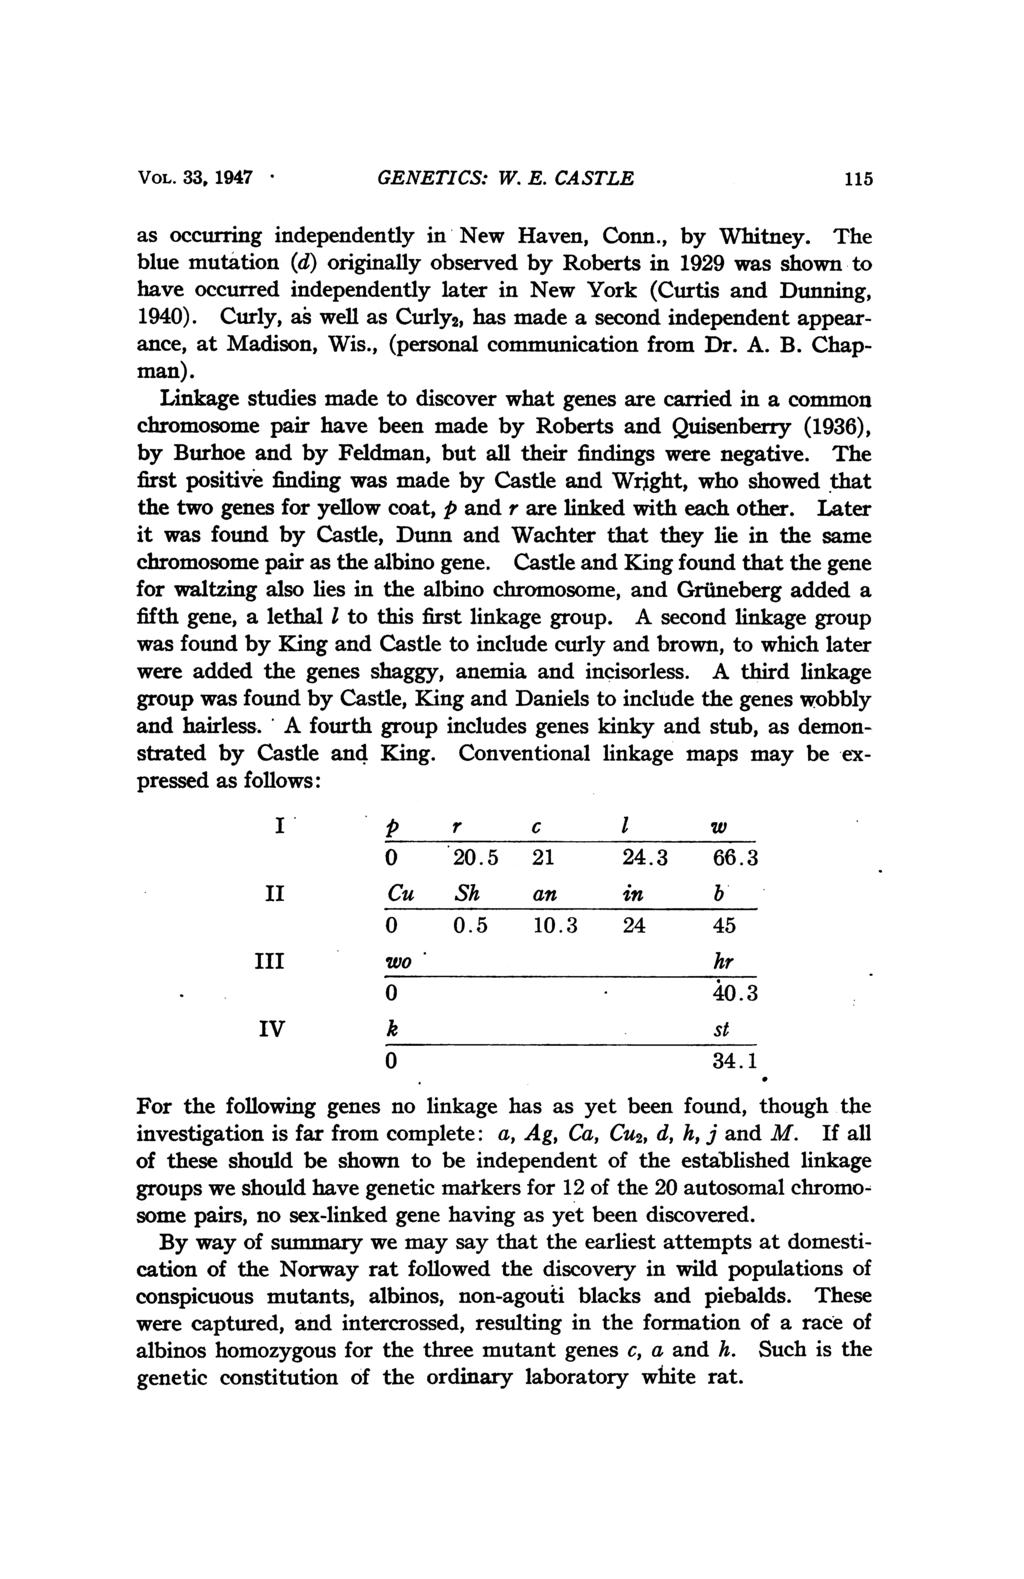 VOL. 33, 1947 GENETICS: W. E. CASTLE 115 as occurrng independently in New Haven, Conn., by Whitney.